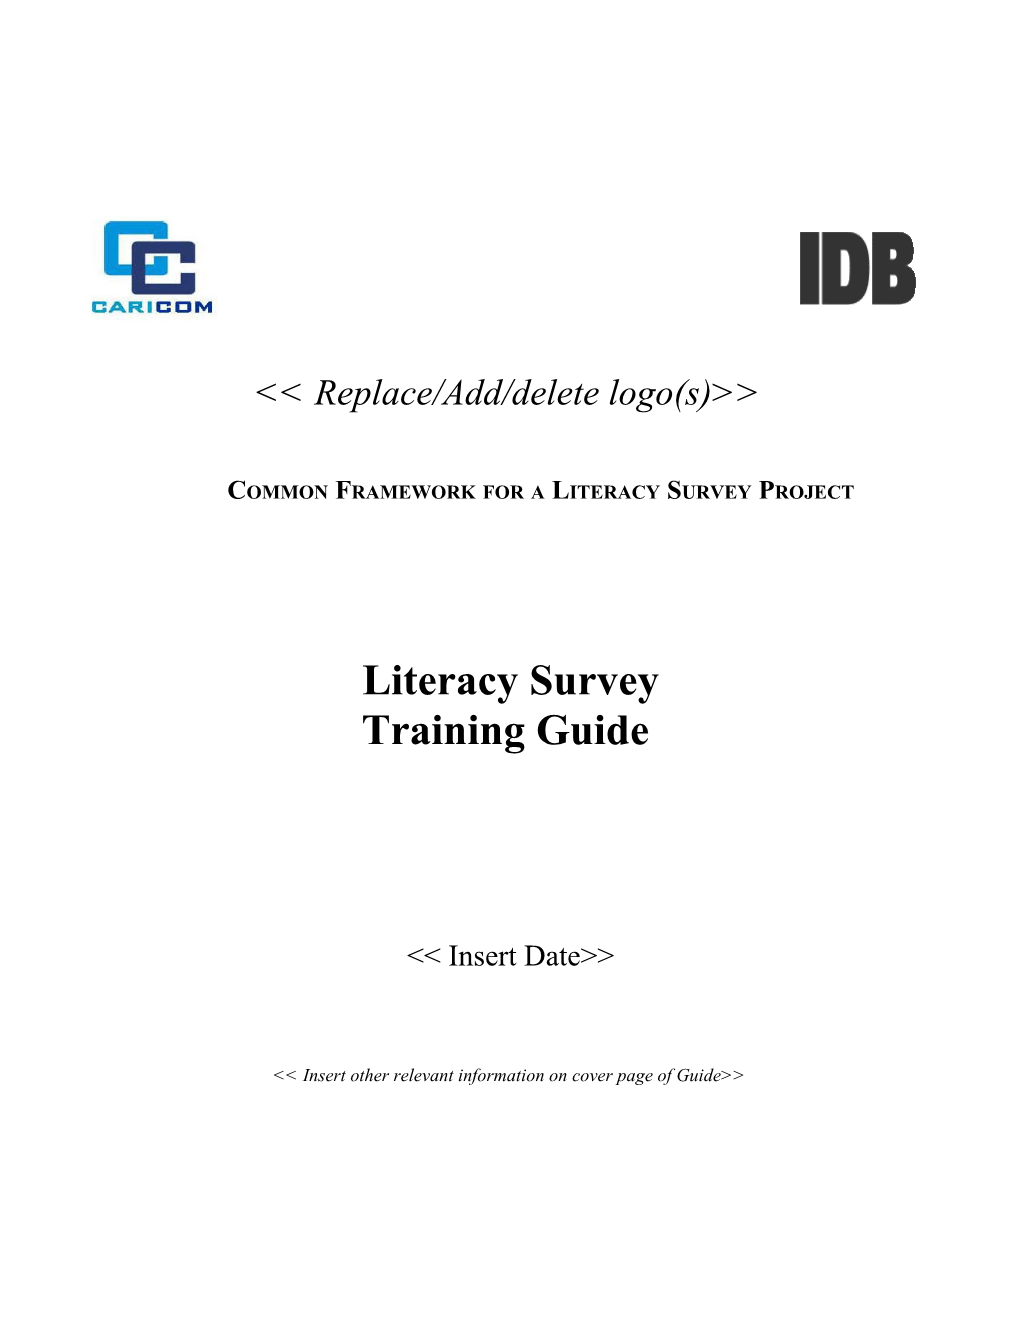 Common Framework for a Literacy Survey Project